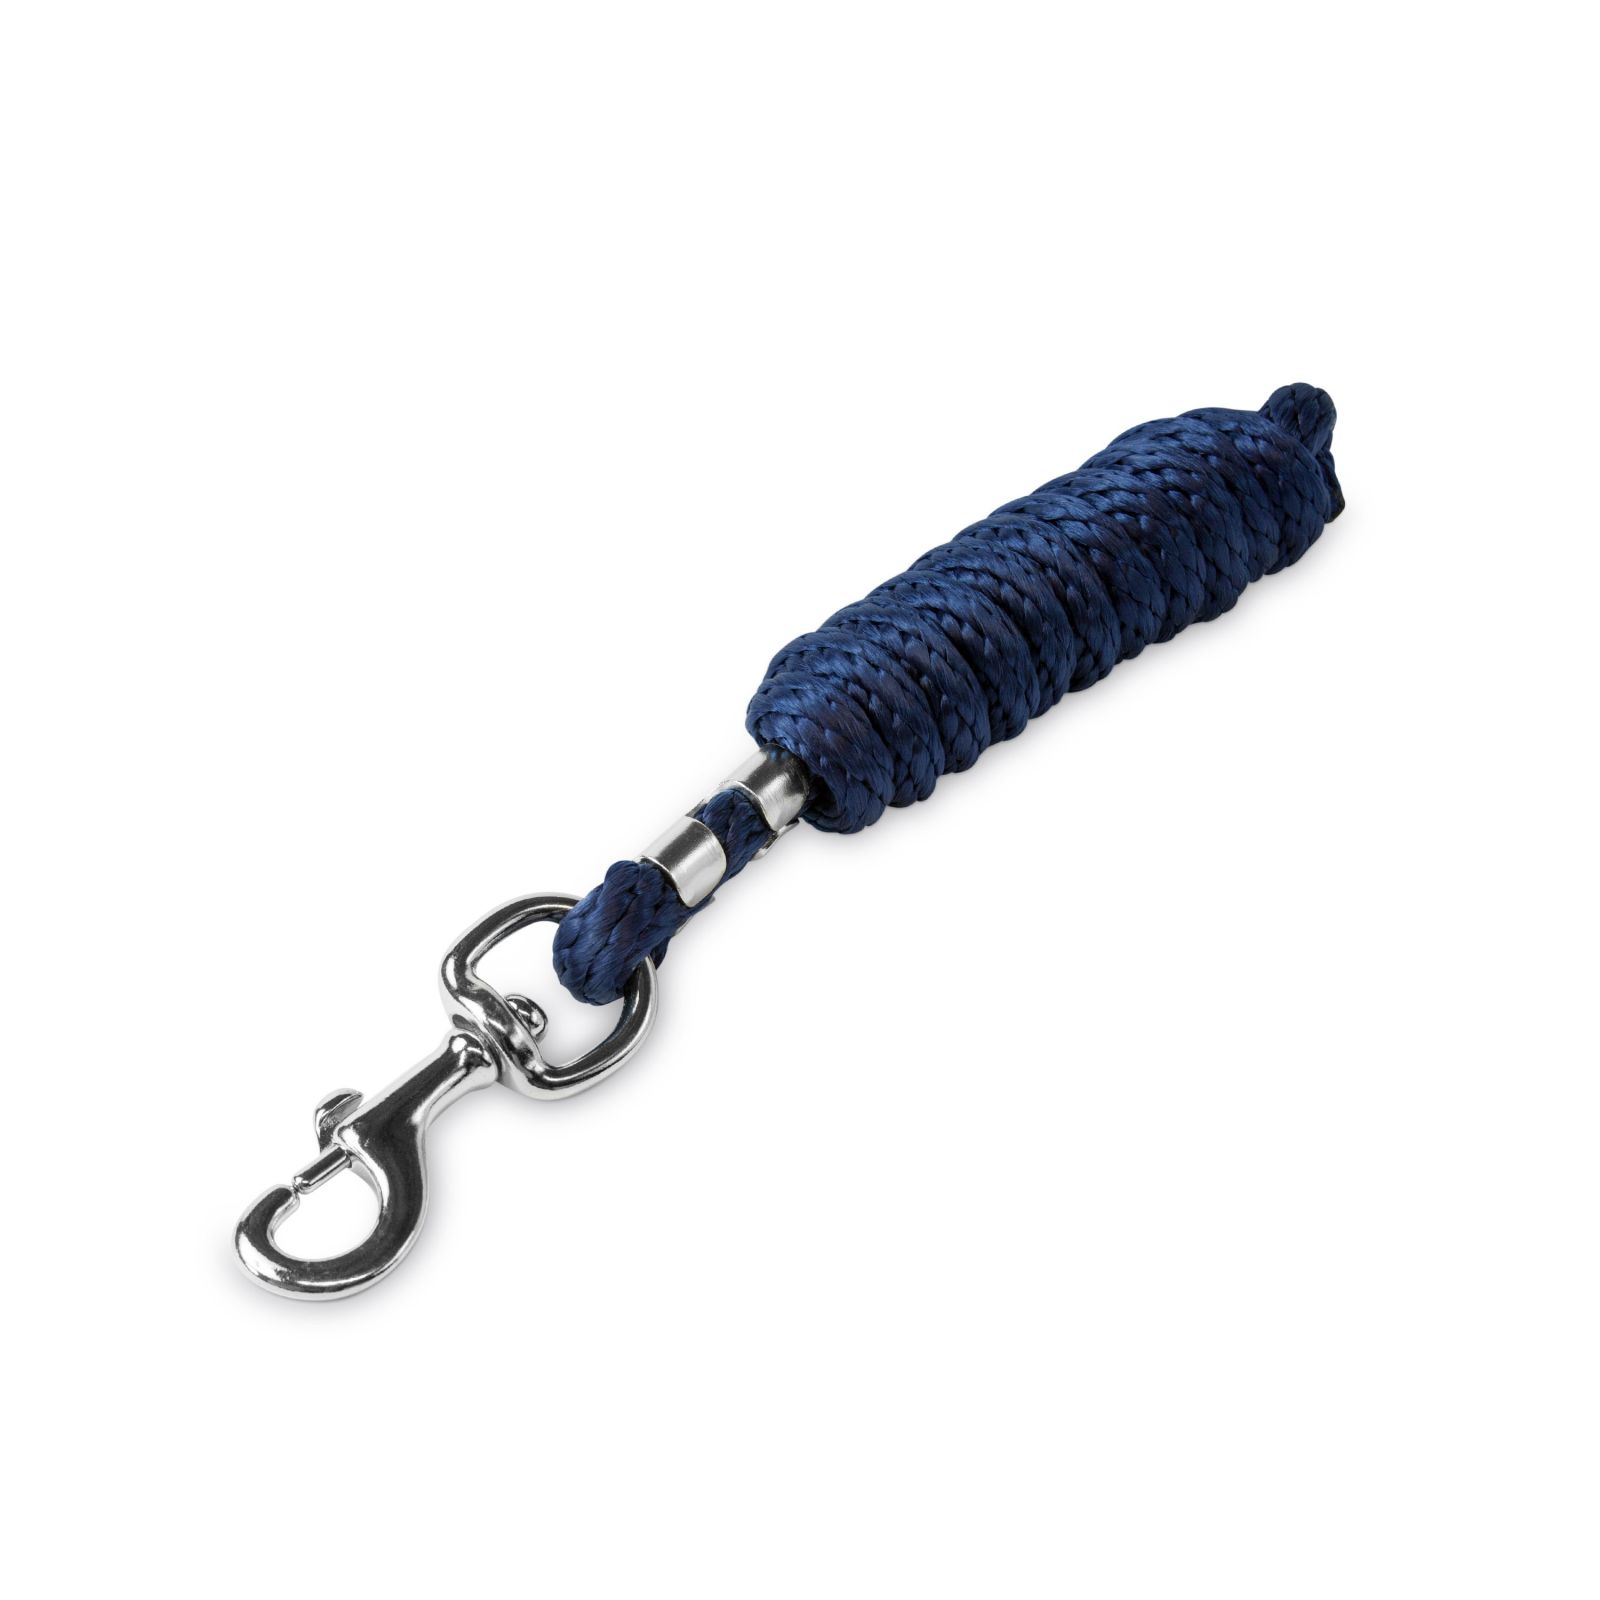 KM 6ft Poly Lead Rope Nickel Clip